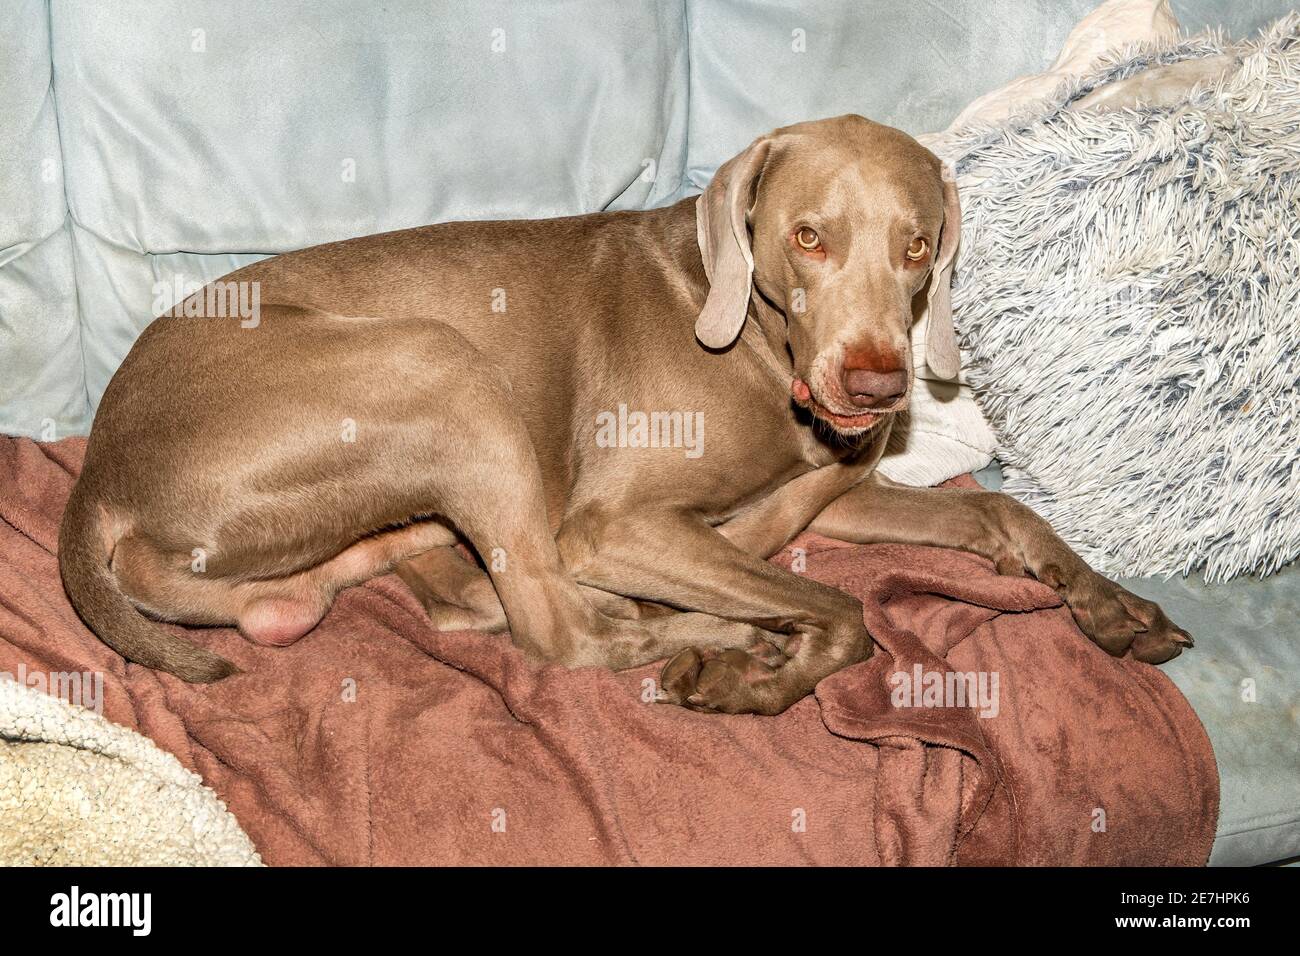 weimaraner dog lies dreamily on the couch. A very sleepy weimaraner dog lays on a fleece blanket on top of a couch. Stock Photo